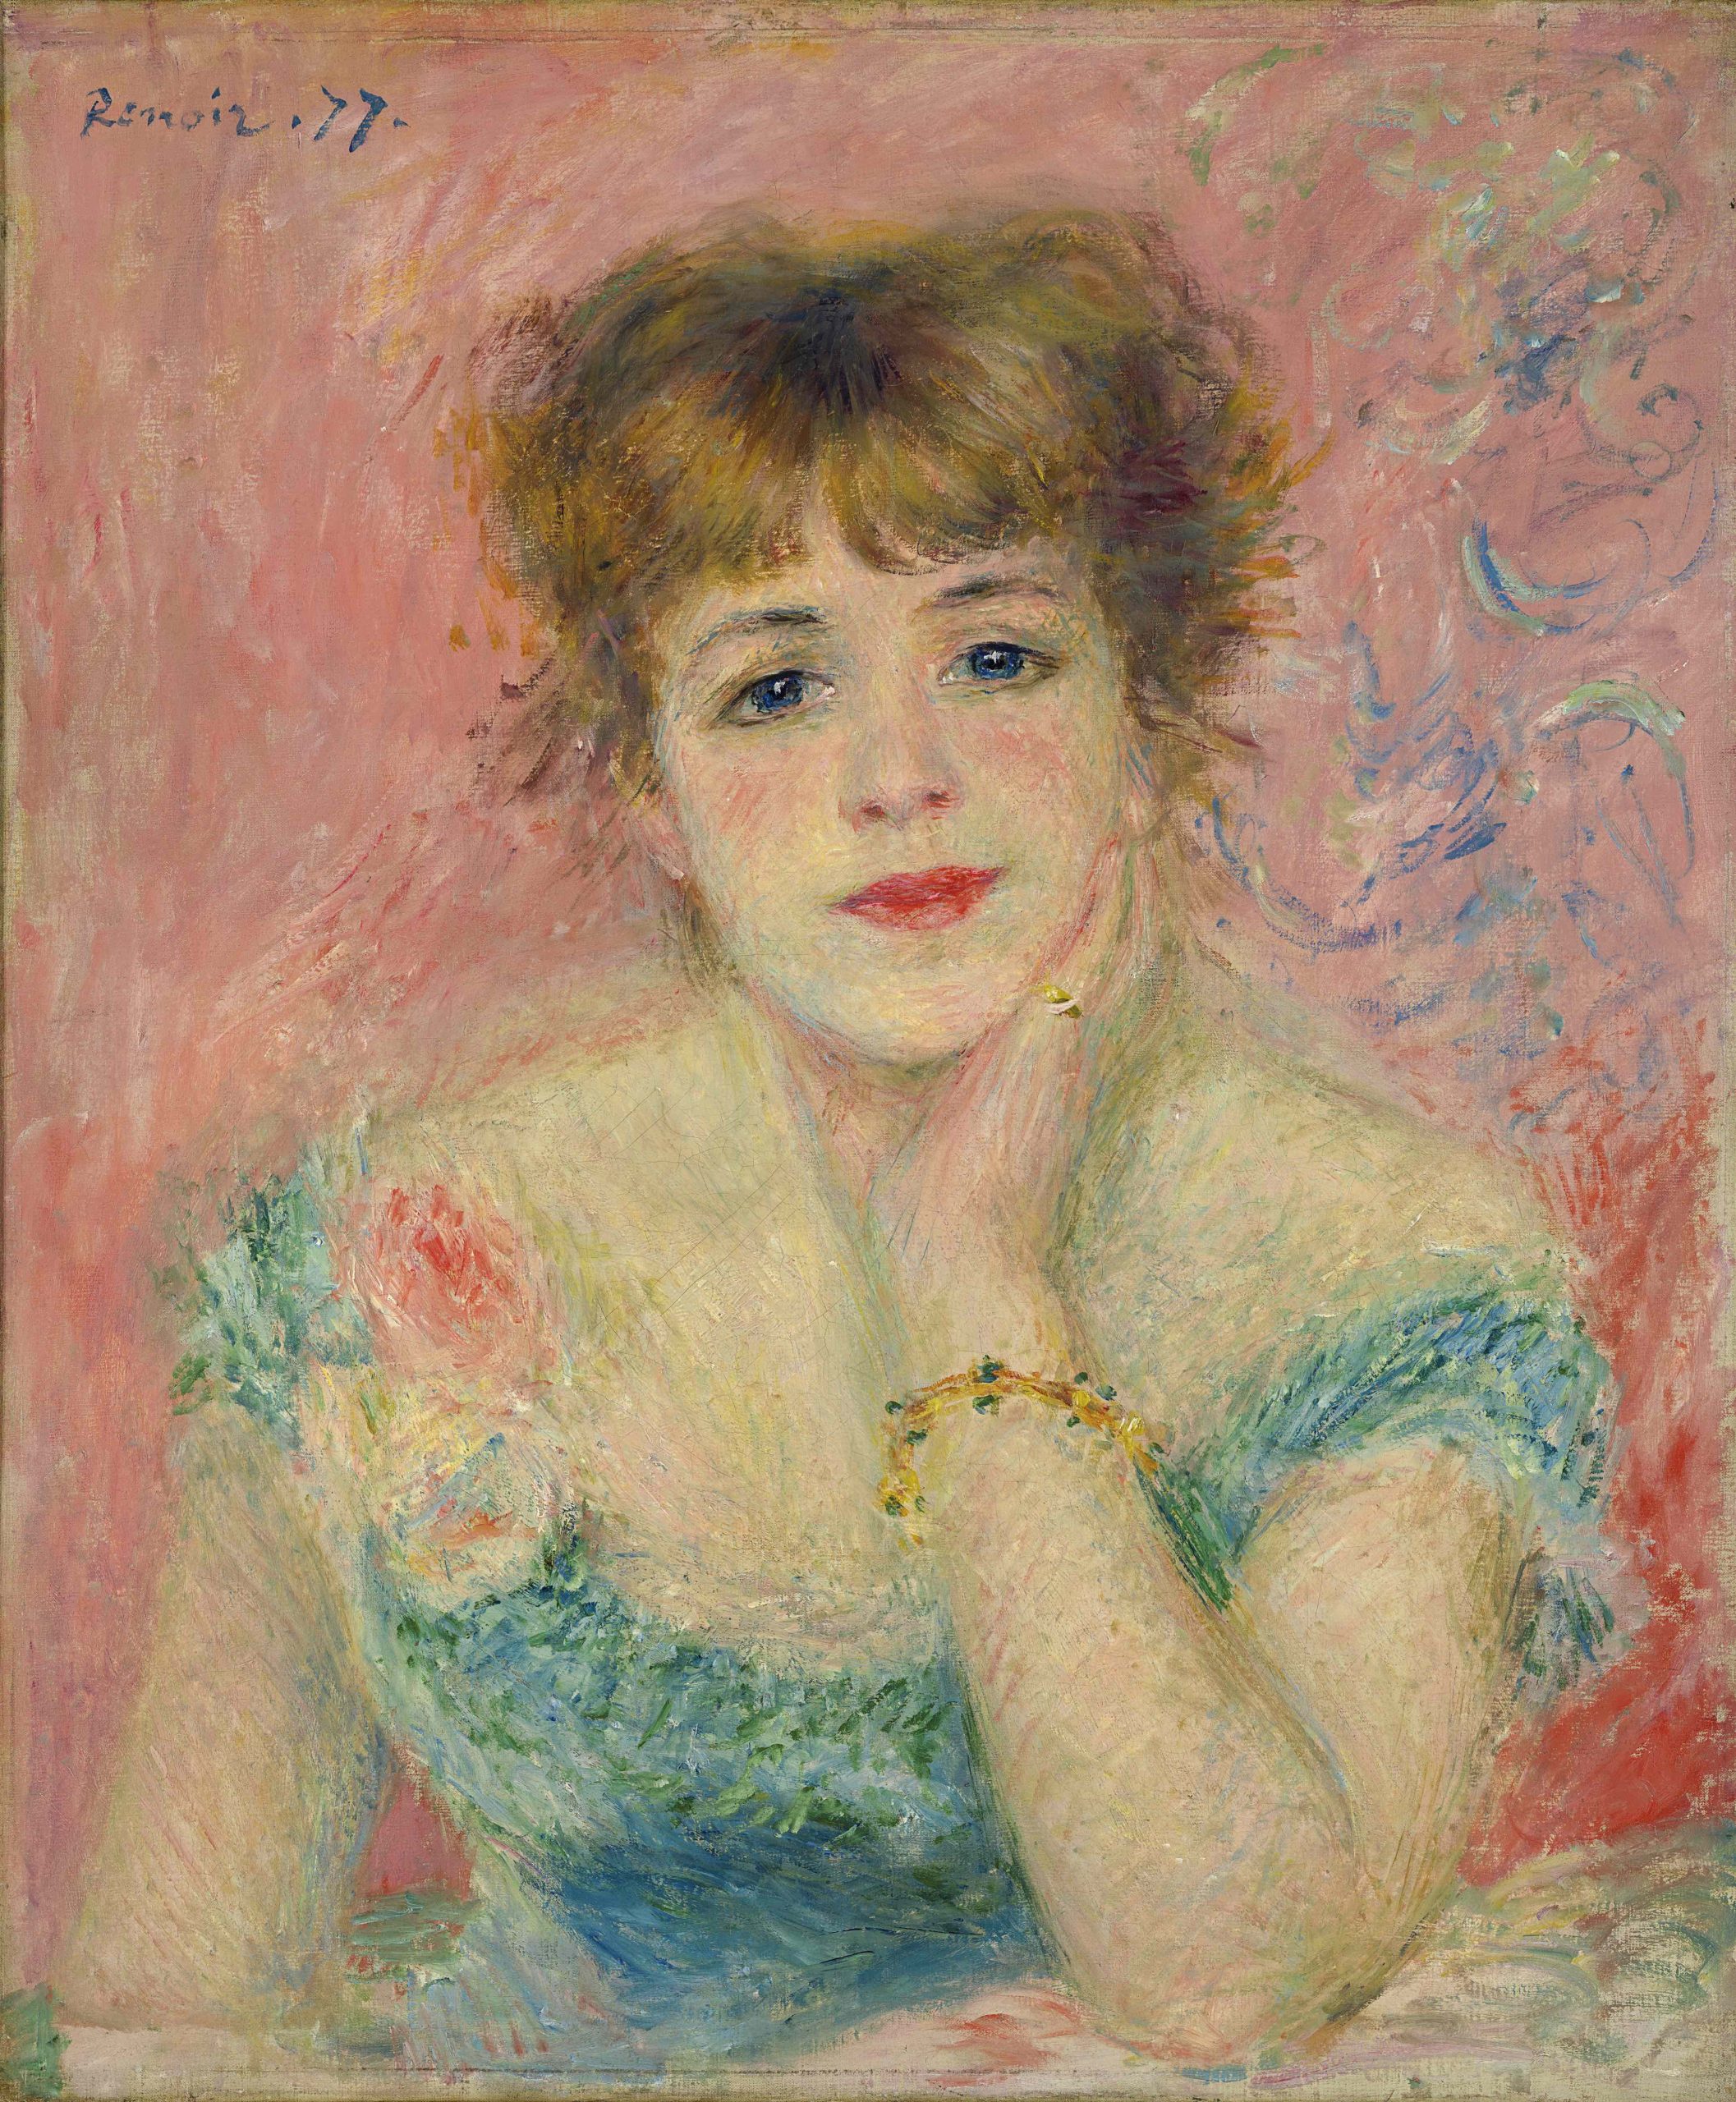 Portrait of Jeanne Samary or La Rêverie. Jean-Auguste Renoir. Oil on canvas, 56 × 47 cm, 1877. Pushkin Museum of Fine Arts, Moscow (old Morozov collection). © Pushkin Museum of Fine Arts FAD MAGAZNE